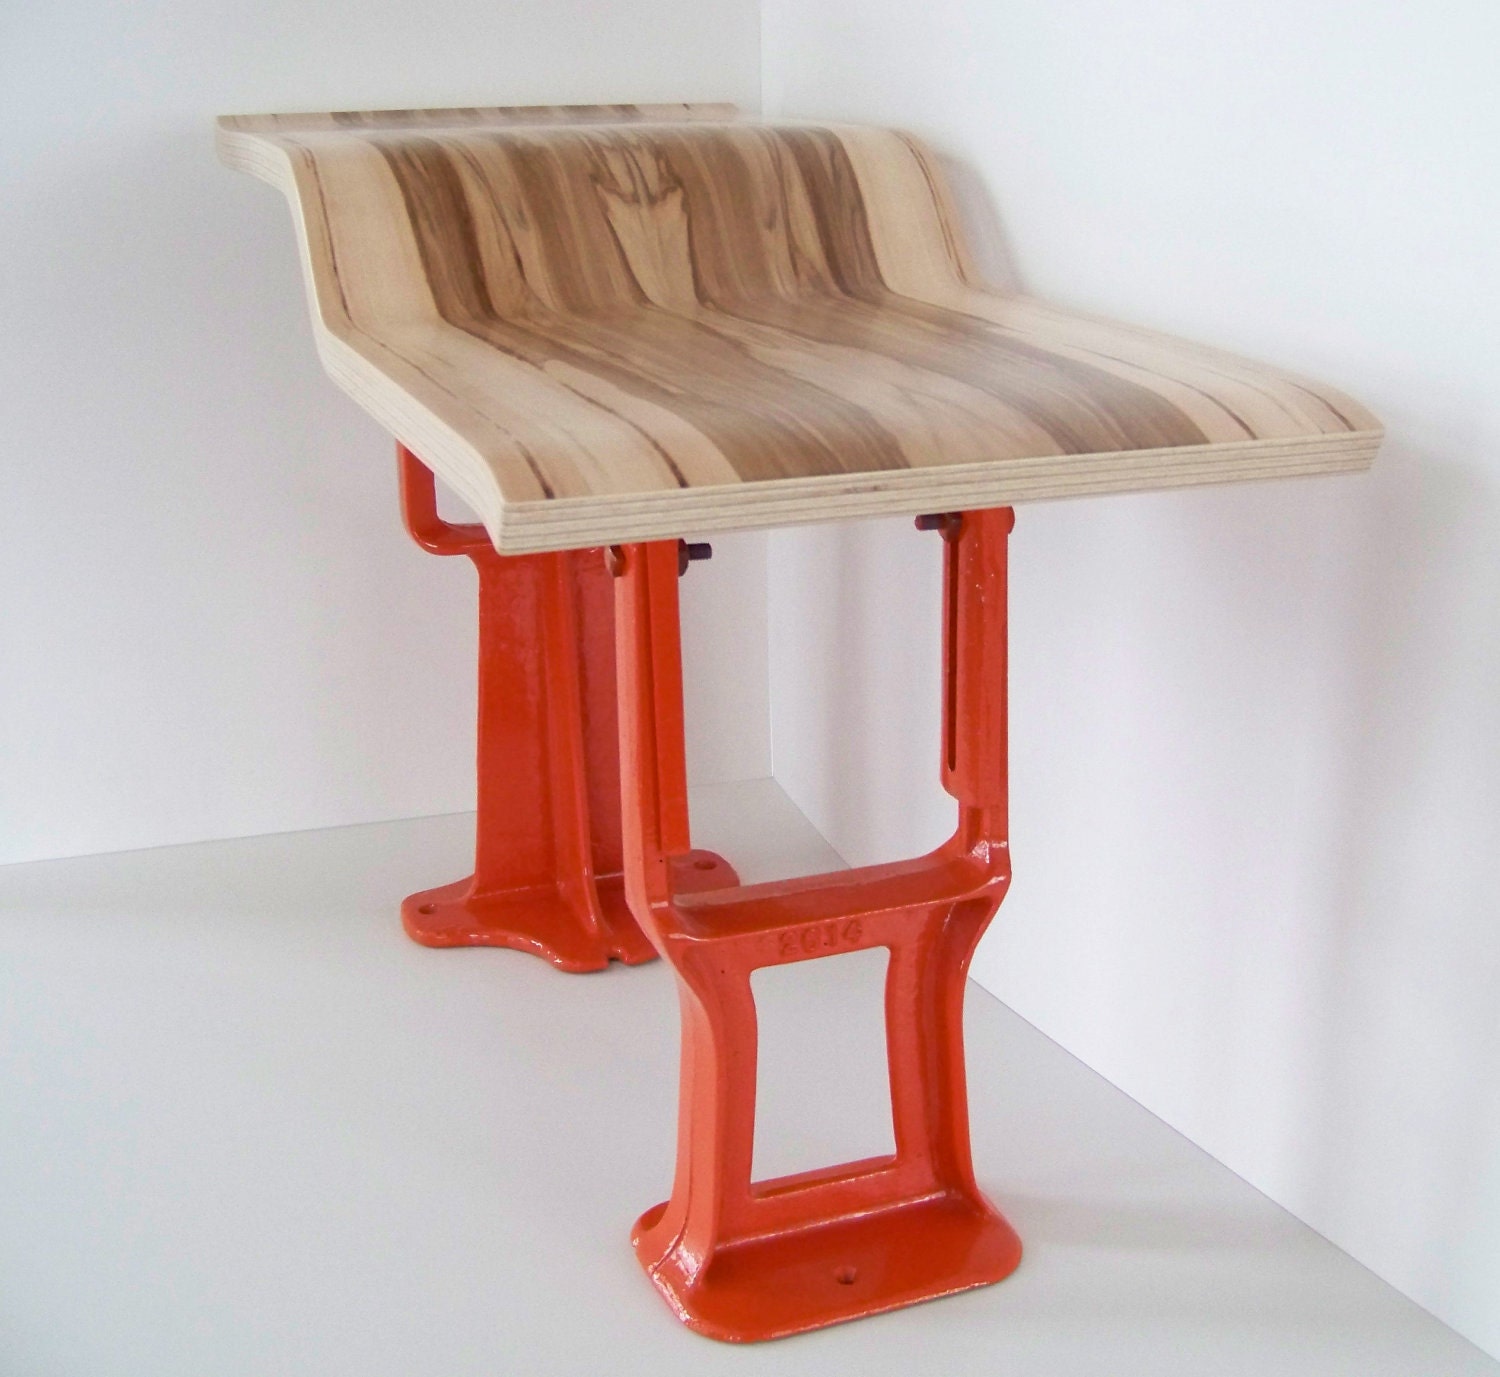 bentwood table